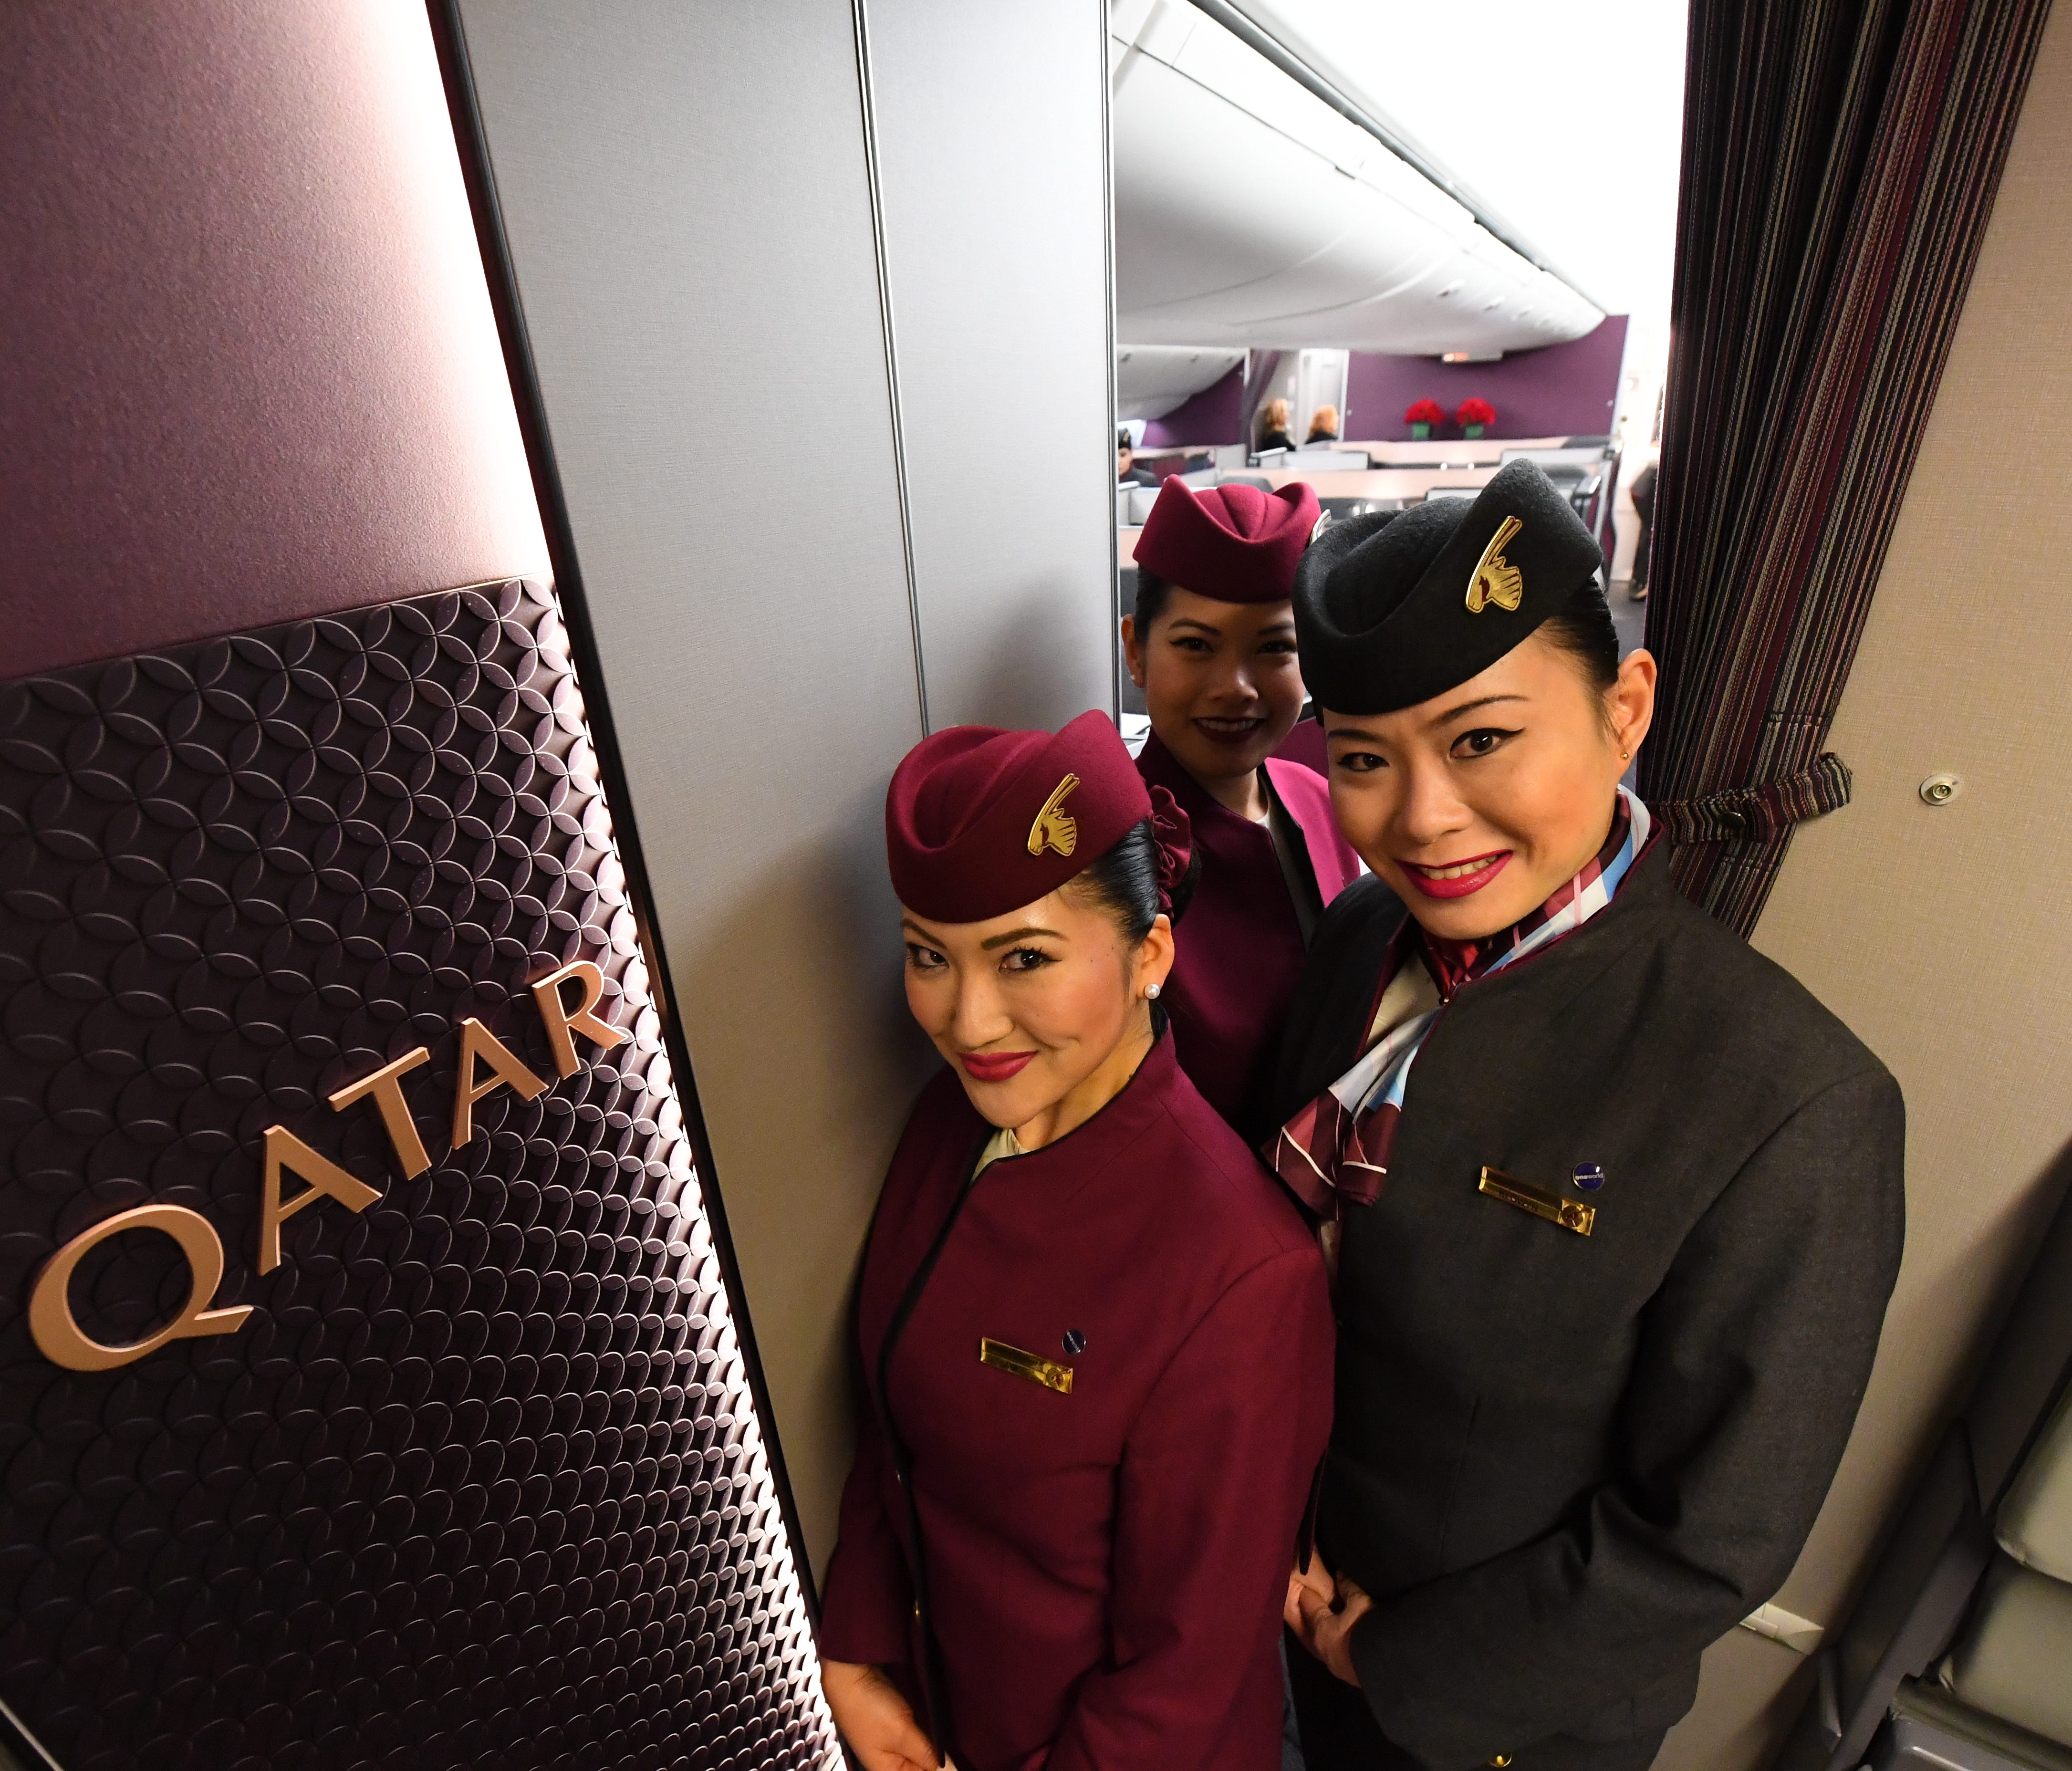 1/18/18 6:26:10 PM -- New York JFK airport, NY  -- Flight attendants greet the passengers on the Boeing 777.  No. 1: Auckland-Doha (9,032 miles); Qatar Airways (Boeing 777-200LR); Maximum block time of 17 hours, 40 minutes. (Data source: OAG, gcmap.co